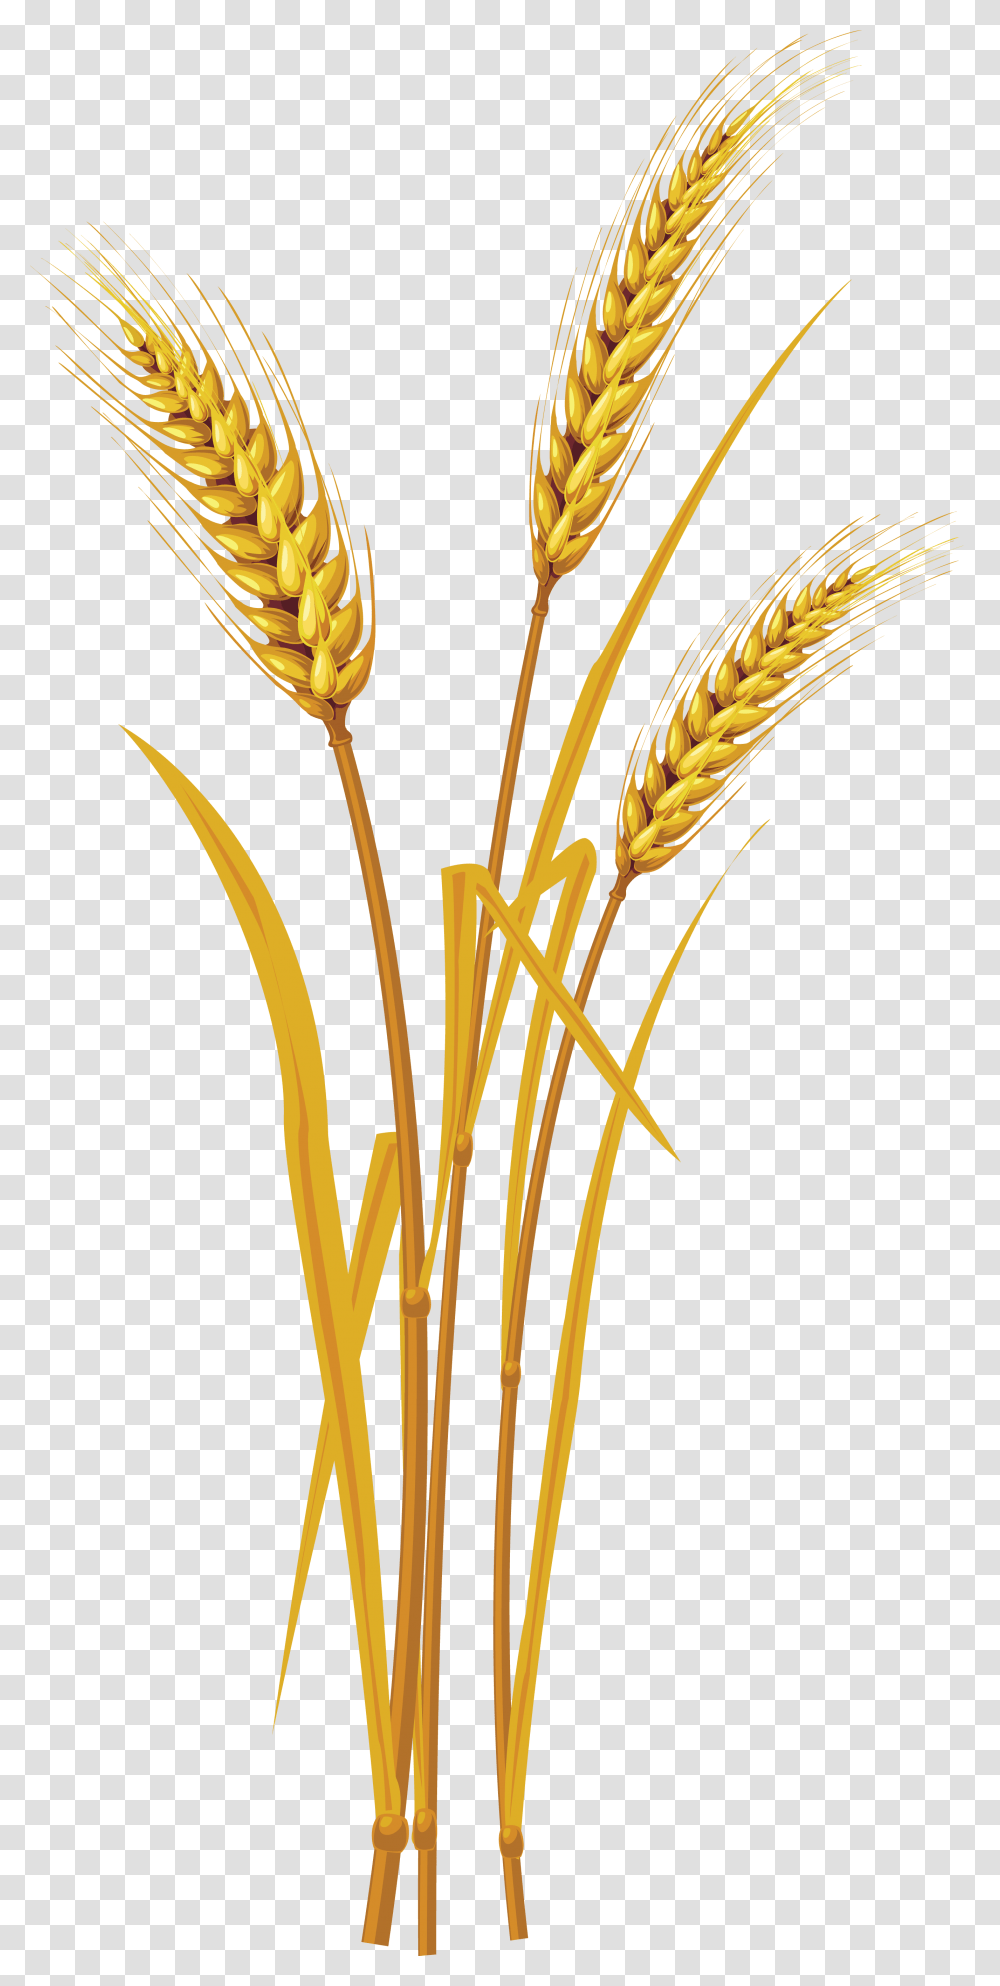 Download Wheat Image With No Background, Plant, Vegetable, Food, Construction Crane Transparent Png